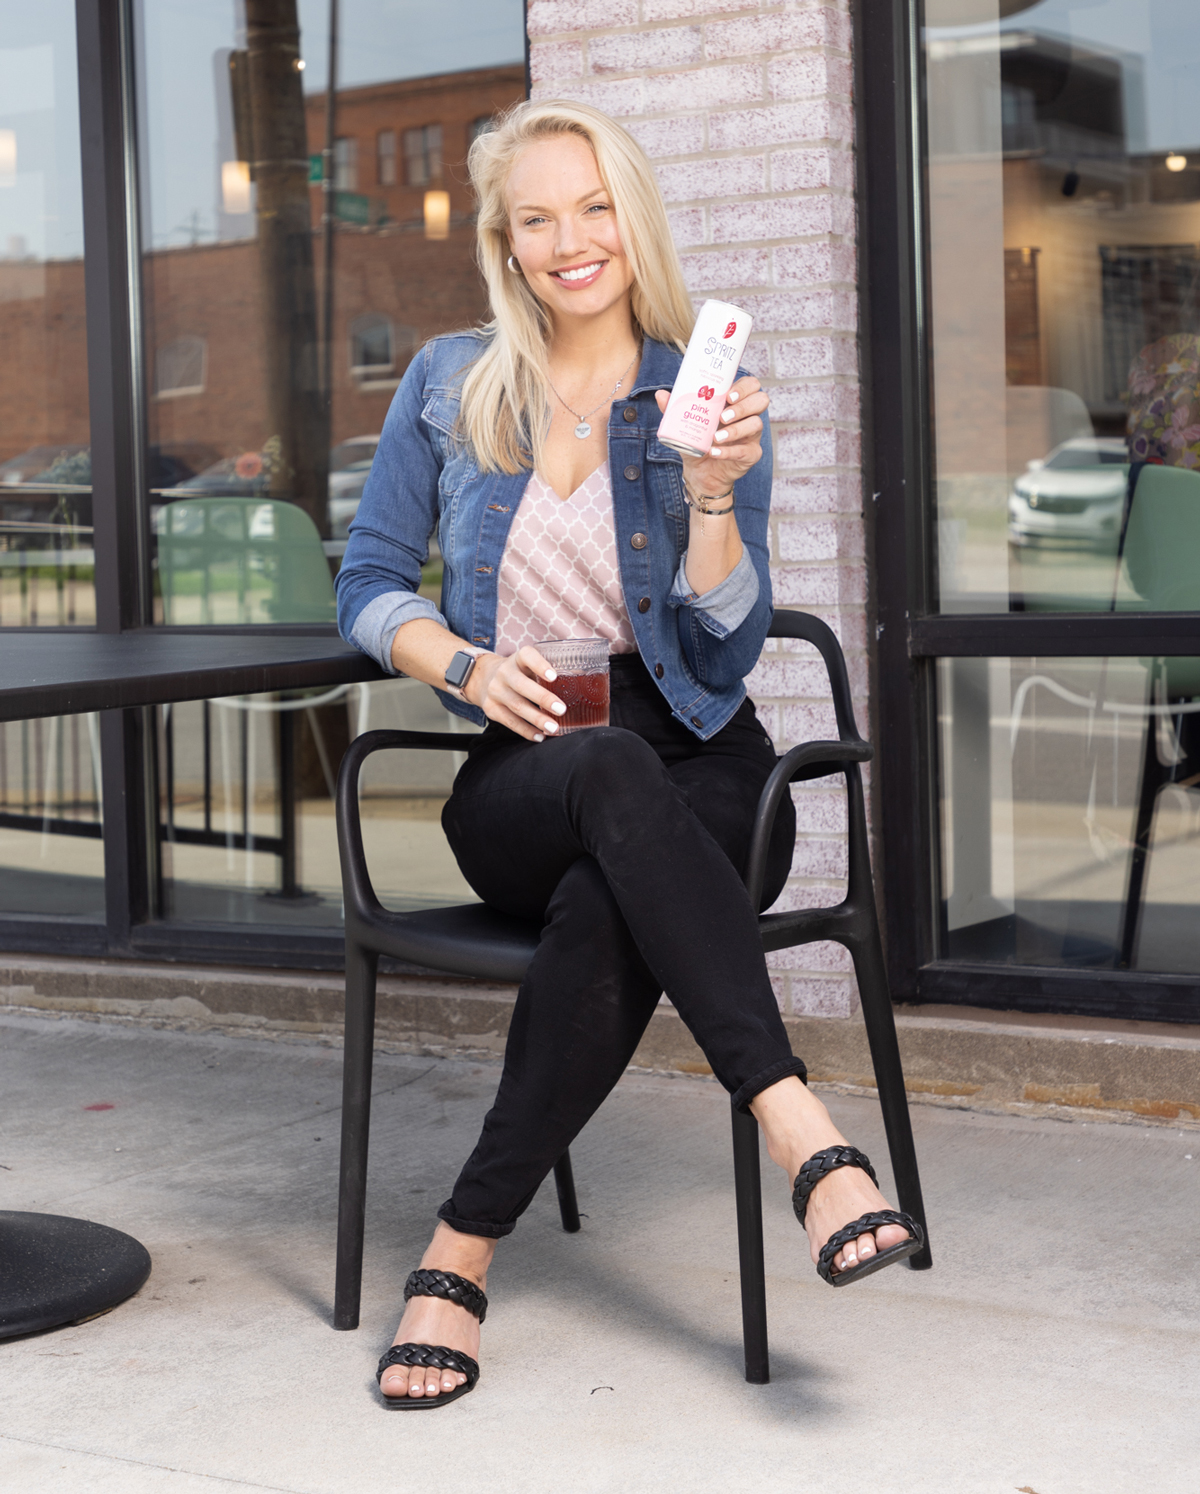 Kathryn Dougherty ’09 Fin & Econ hit the restart button on her career when she realized a  passion for  entrepreneurship. She is the founder and CEO of Spritz Tea,  a line of non- alcoholic spritzer drinks that come in four flavors.